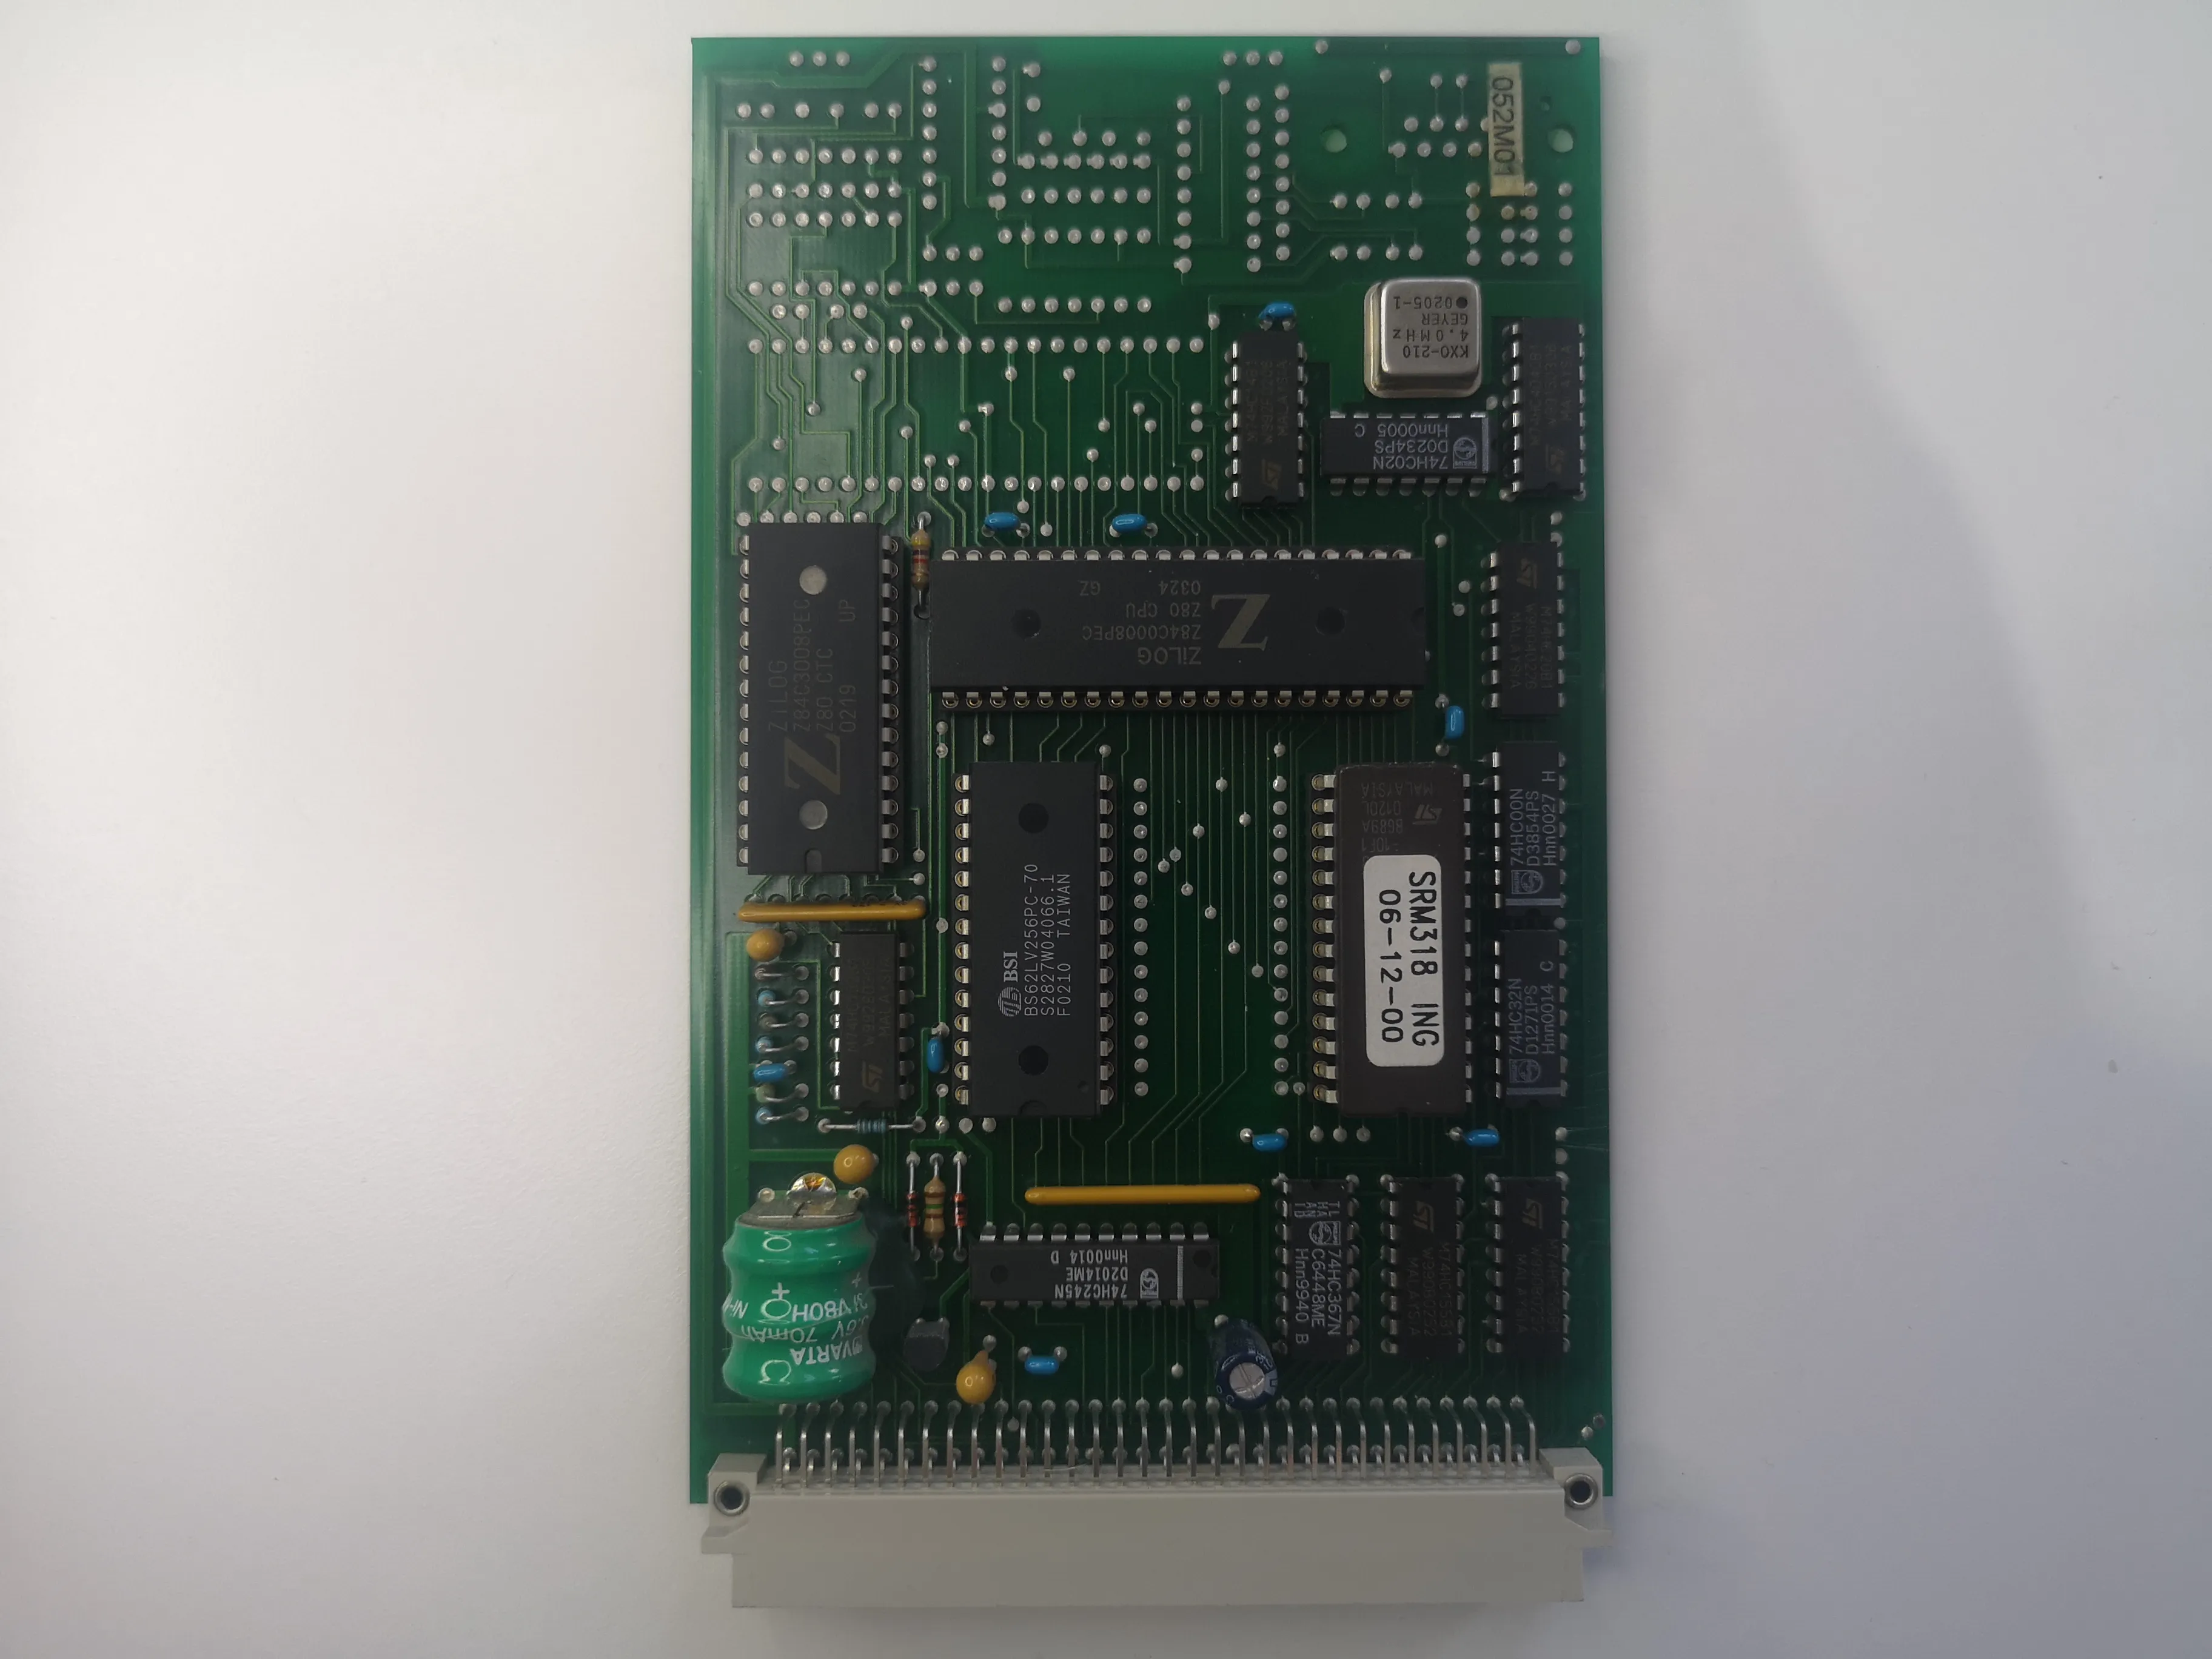 Image of the Z80 board